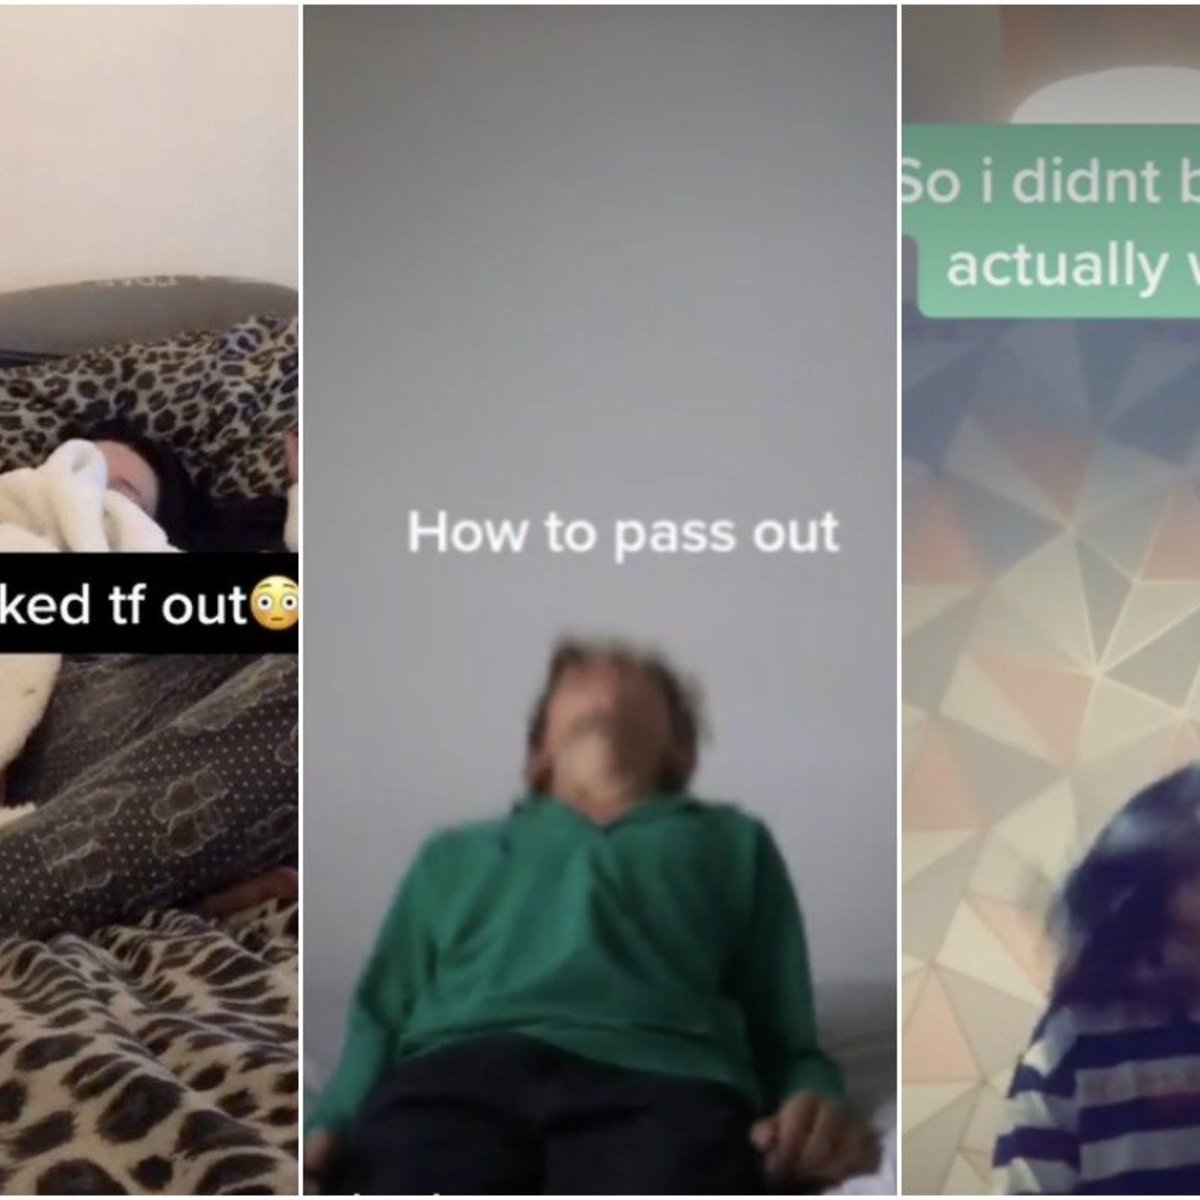 Why The Pass Out Challenge On Tiktok Is So Dangerous